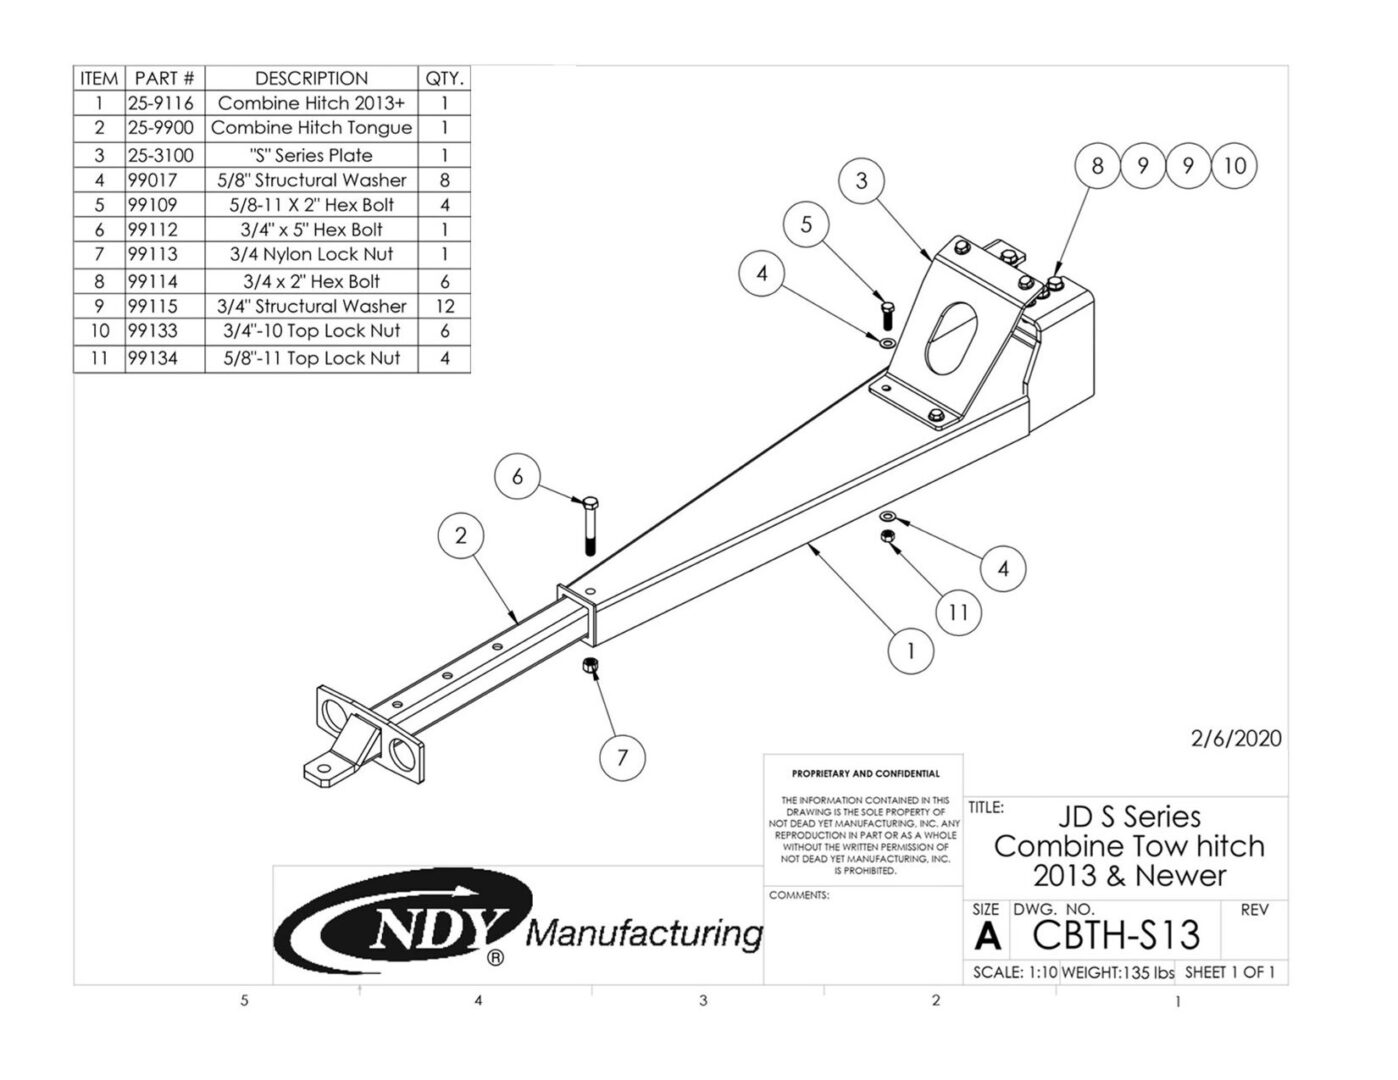 A diagram showing the parts of a Combine Tow Hitch for JD "S" Series 2013 and newer machine.